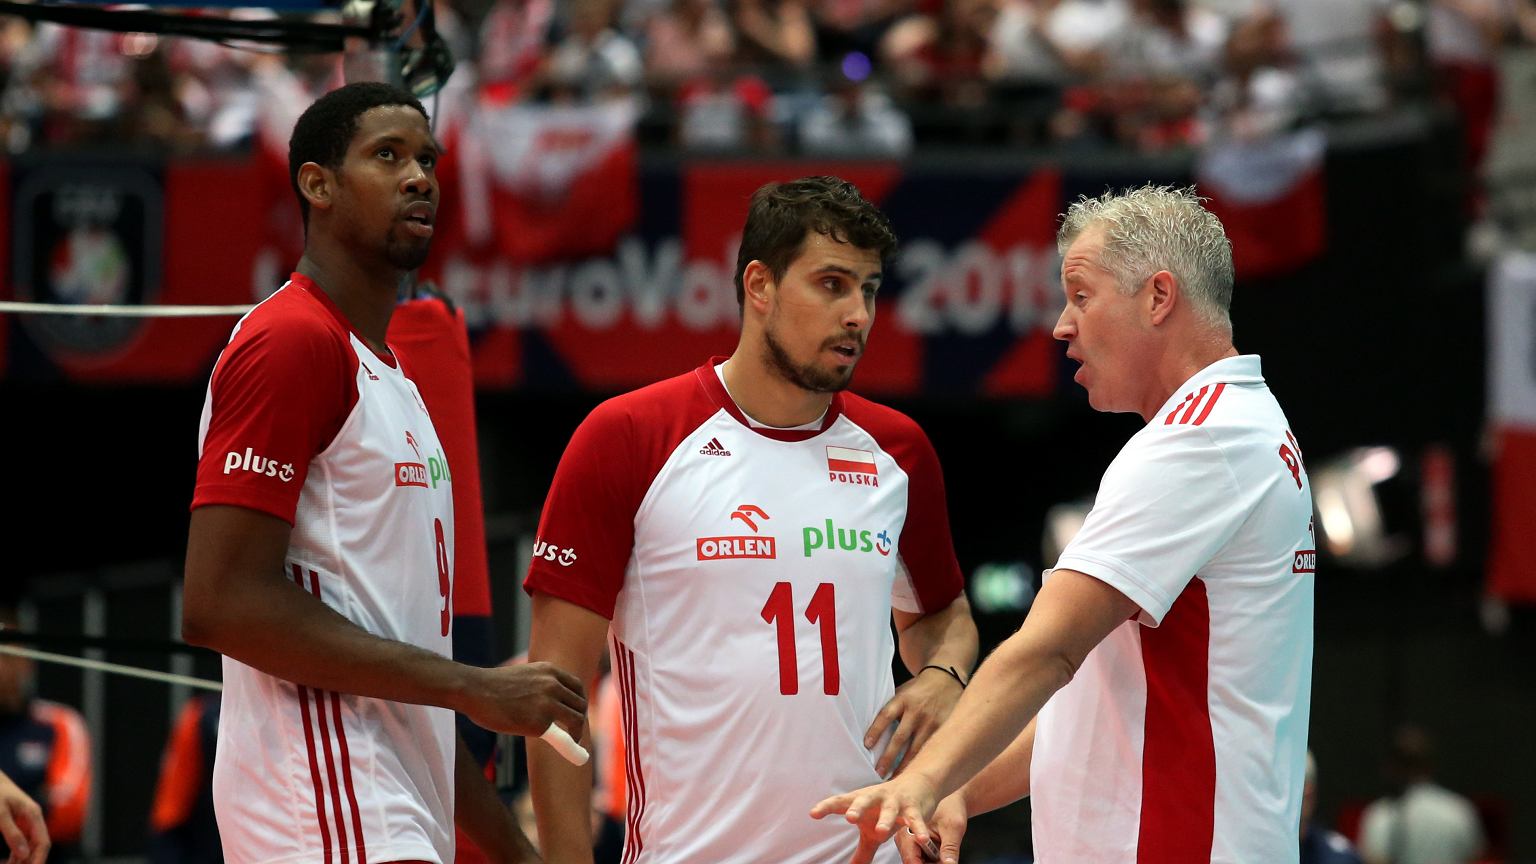 Wilfredo Leon breaks Aces record in Poland-Serbia match in Nations League